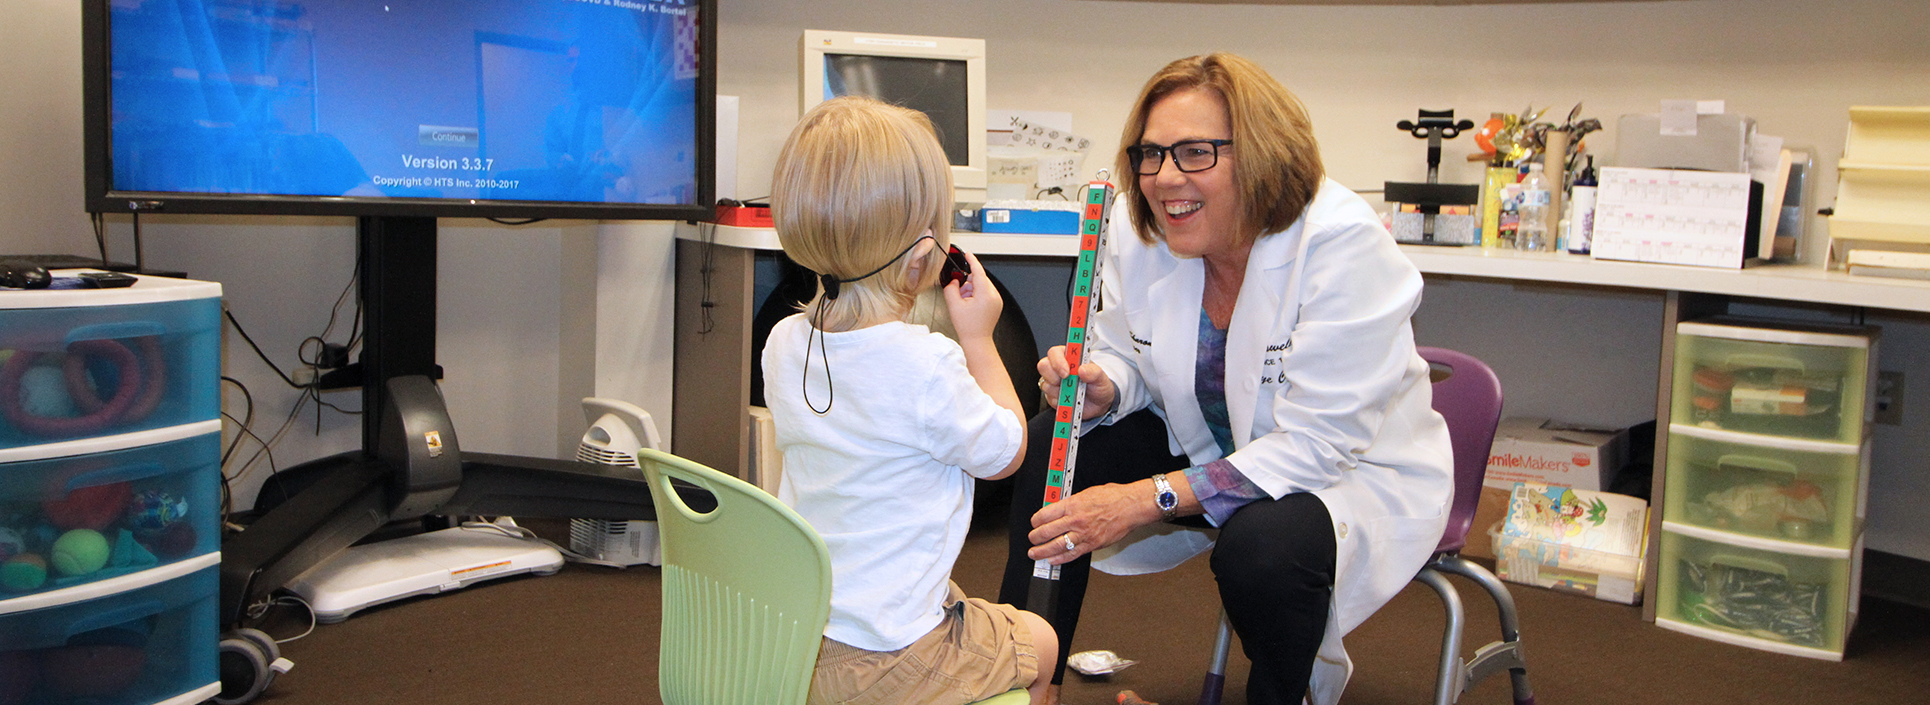 Dr. Sharon Berger smiling and holding a multicolored stick with a young boy holding an eye patch during a vision therapy session.